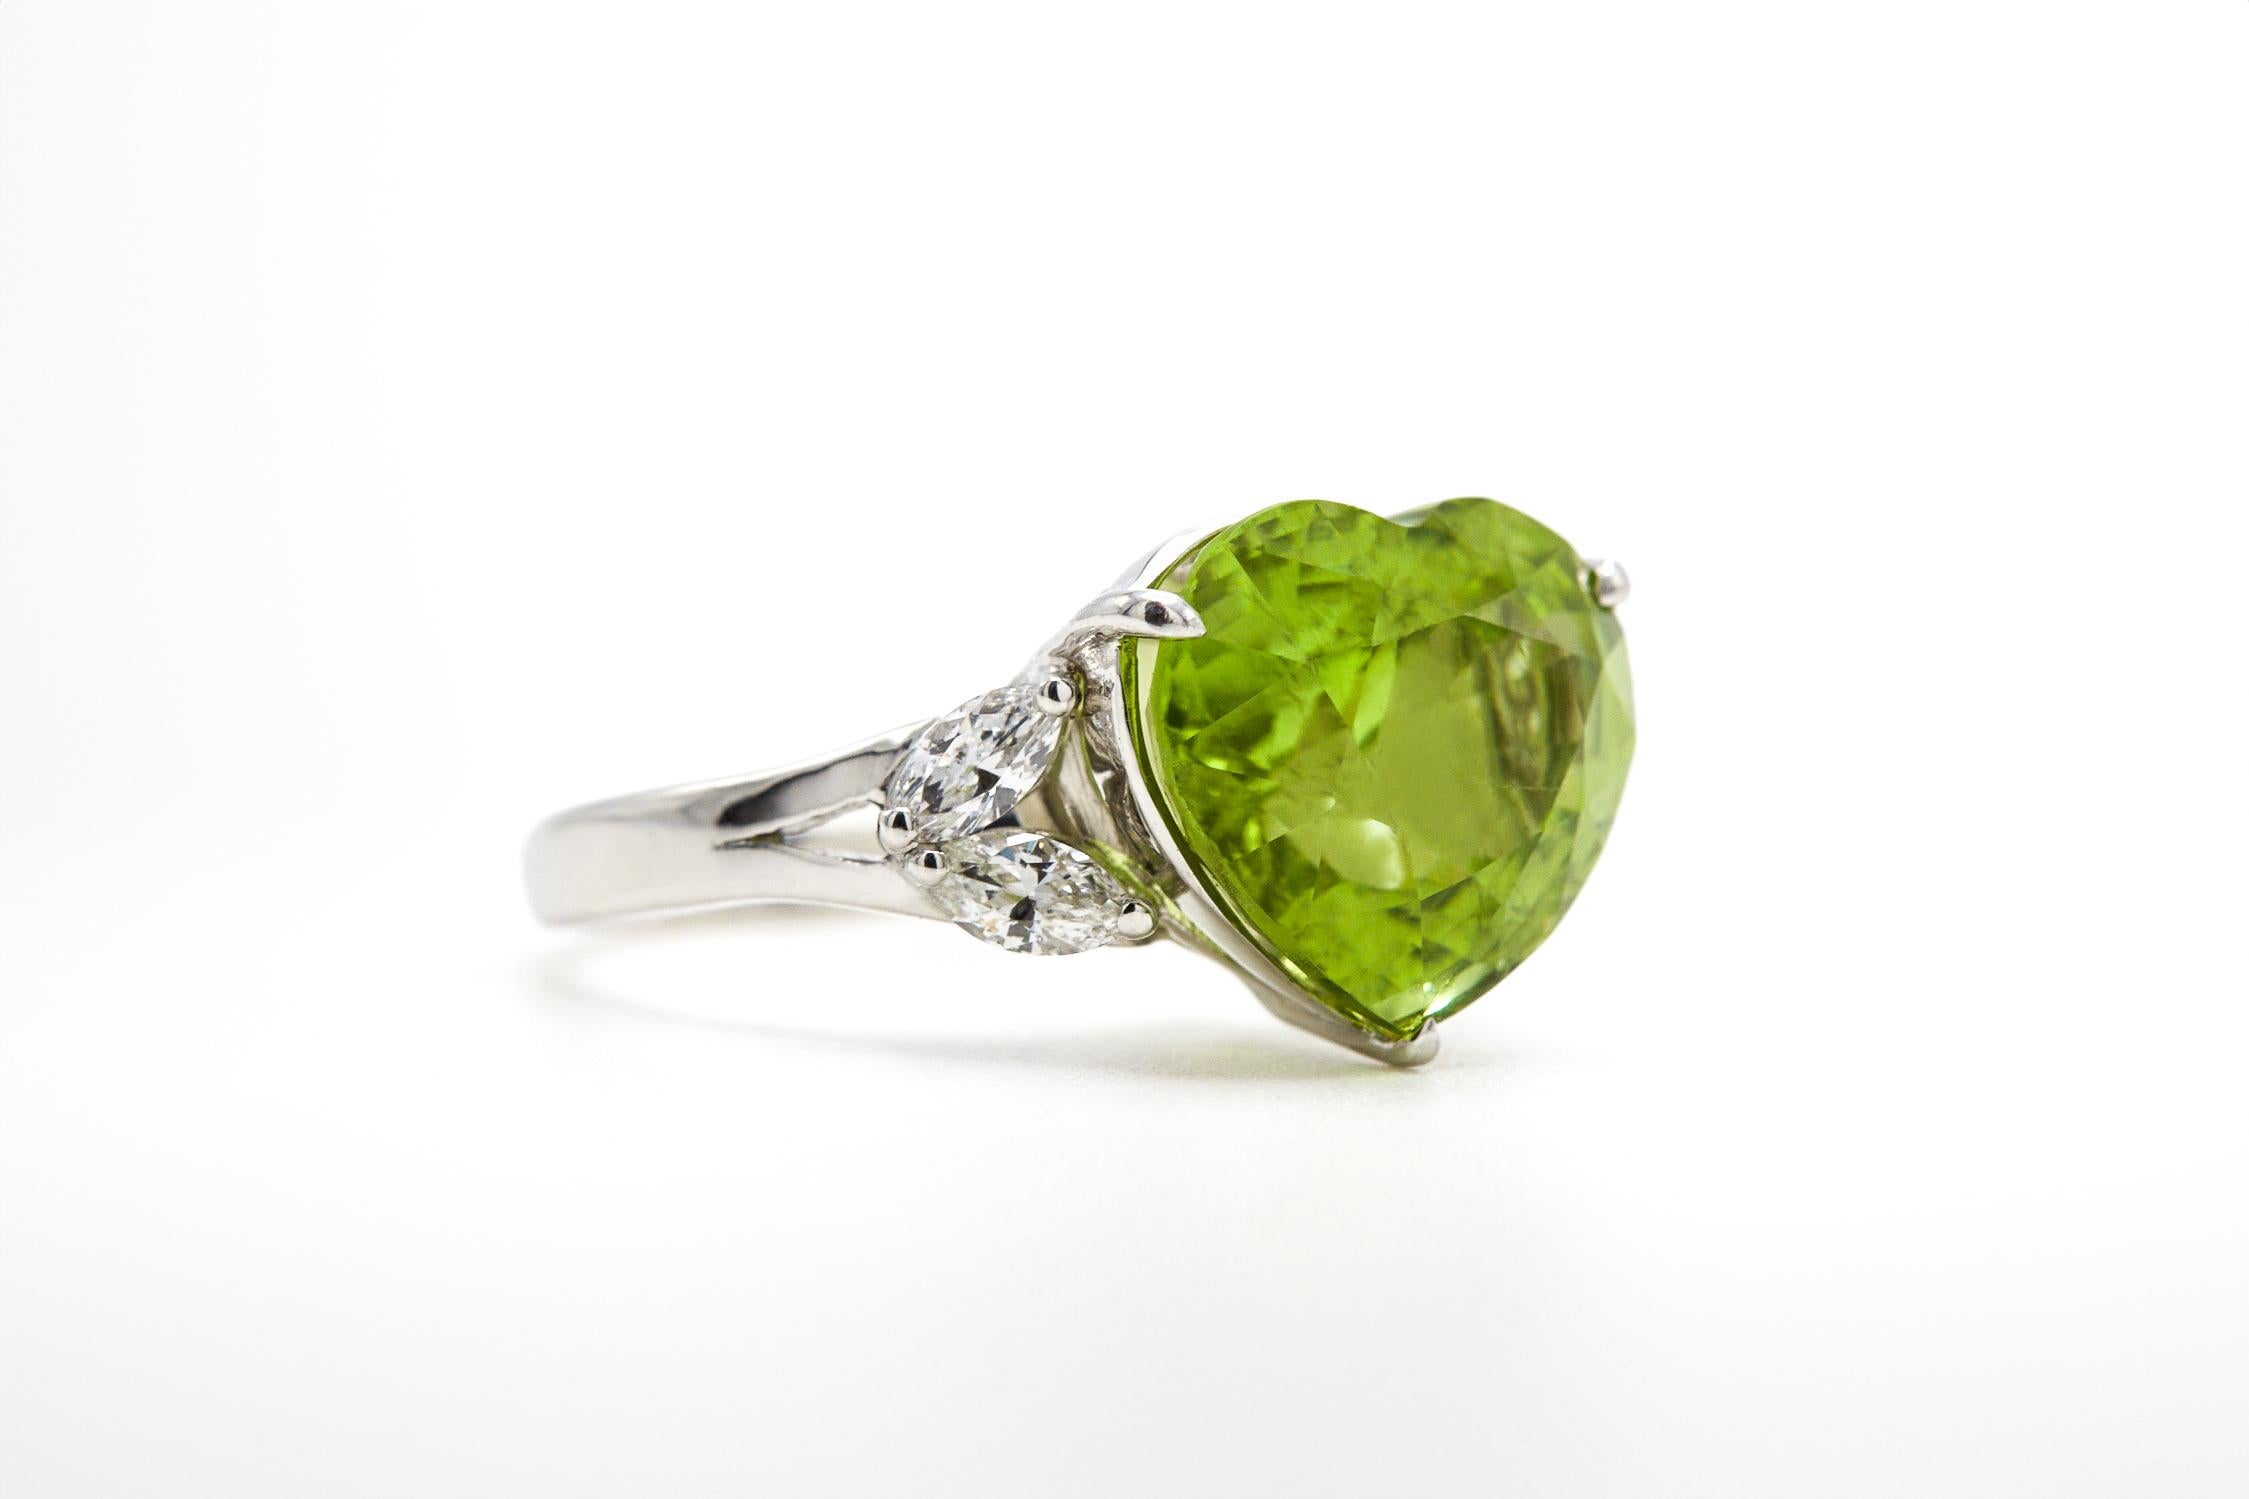 Experience a love that knows no bounds with our captivating Peridot Heart Ring—the 7.62 carat heart-shaped green peridot ring, sourced from the renowned mines of Mogok in Burma. This untreated Peridot, with its elegantly playful green hue and